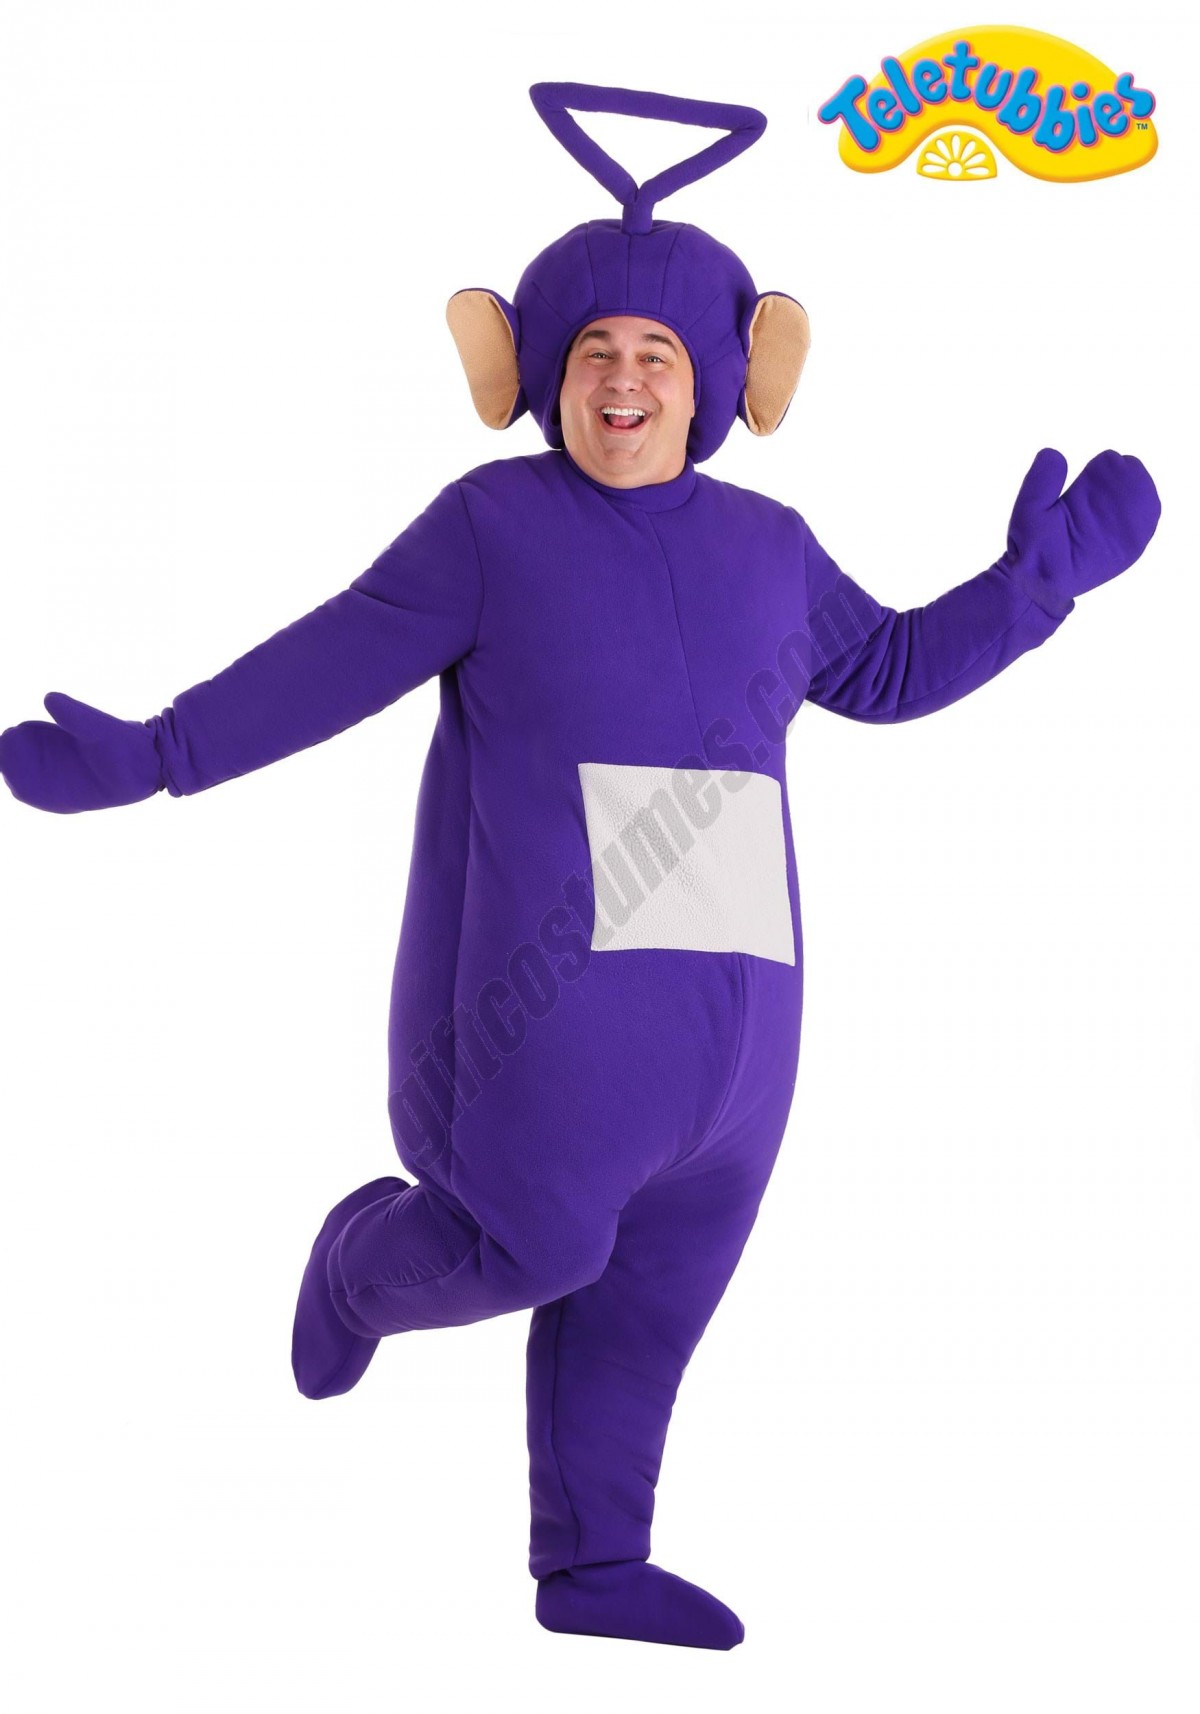 Plus Size Tinky Winky Teletubbies Costume for Adults Promotions - -0